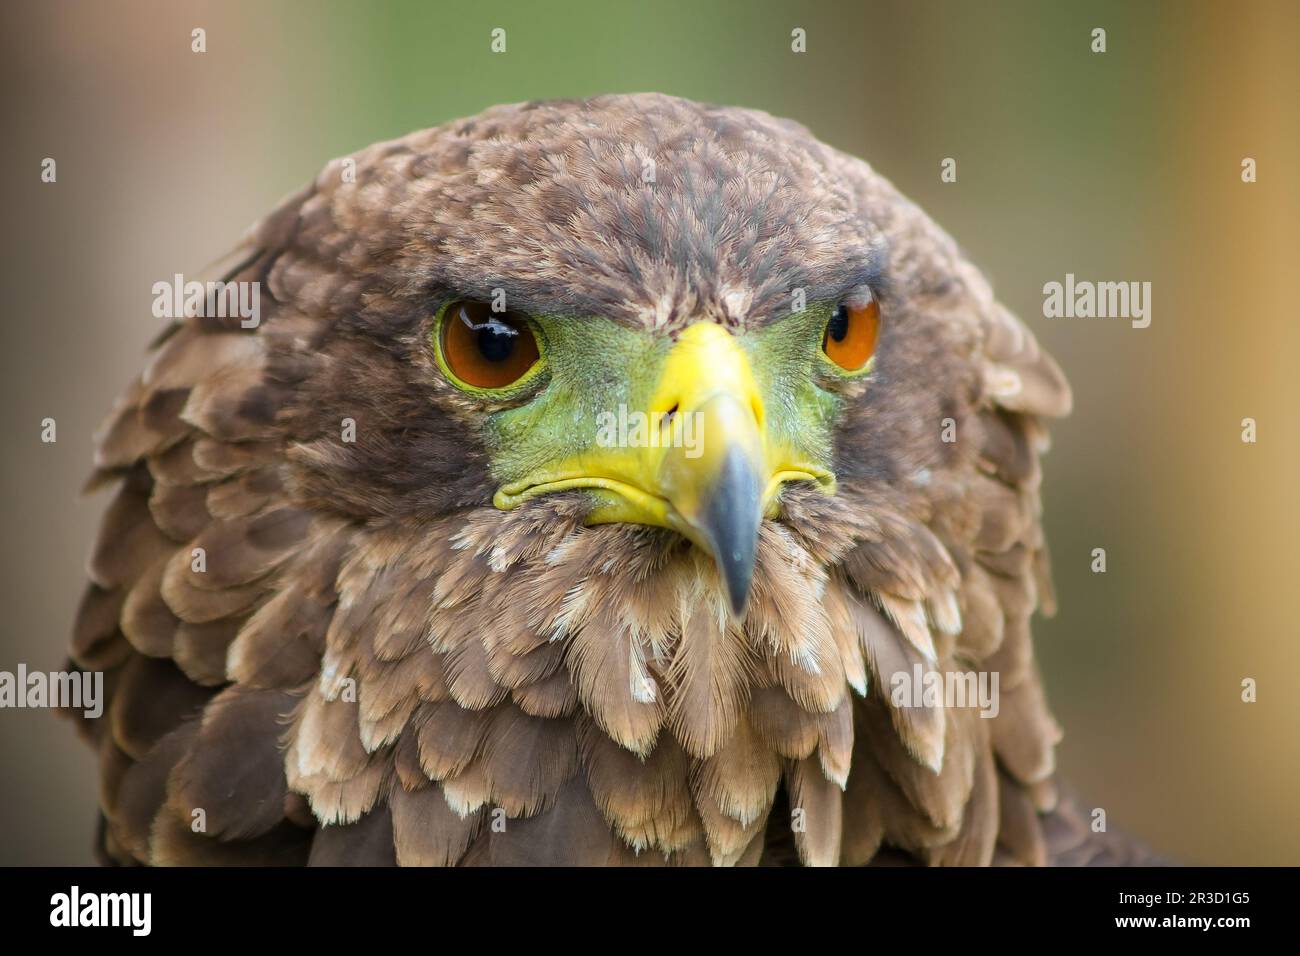 Close up macro of a brown eagle with a green and yellow beak Stock Photo